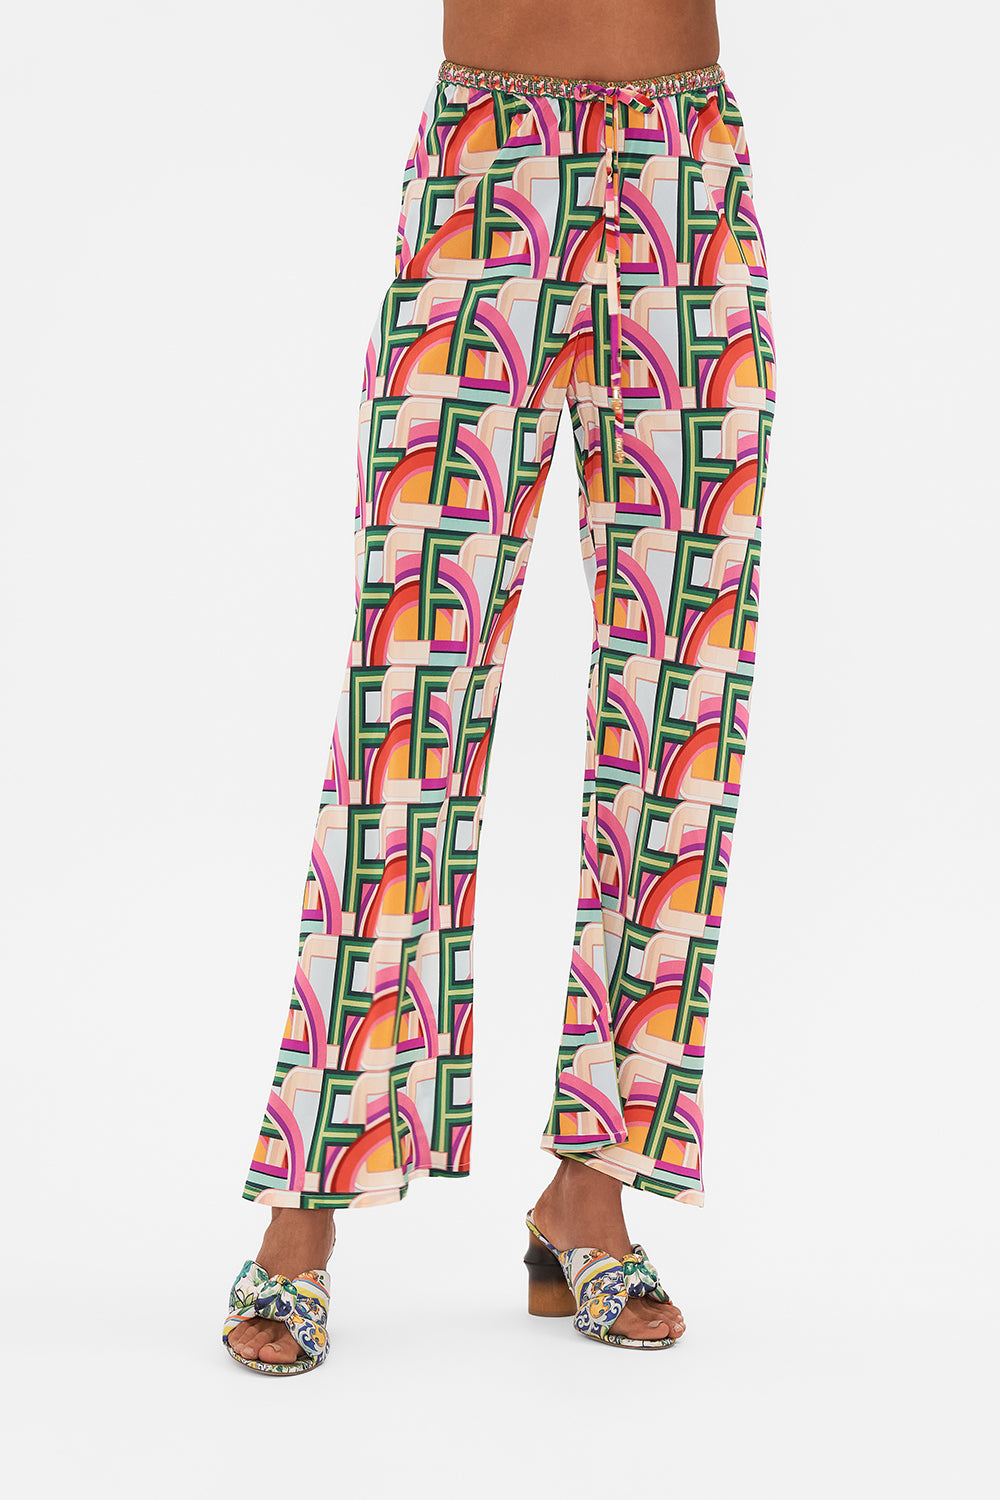 Crop view of model wearing CAMILLA silk drawstring pant in An Italian Welcome print